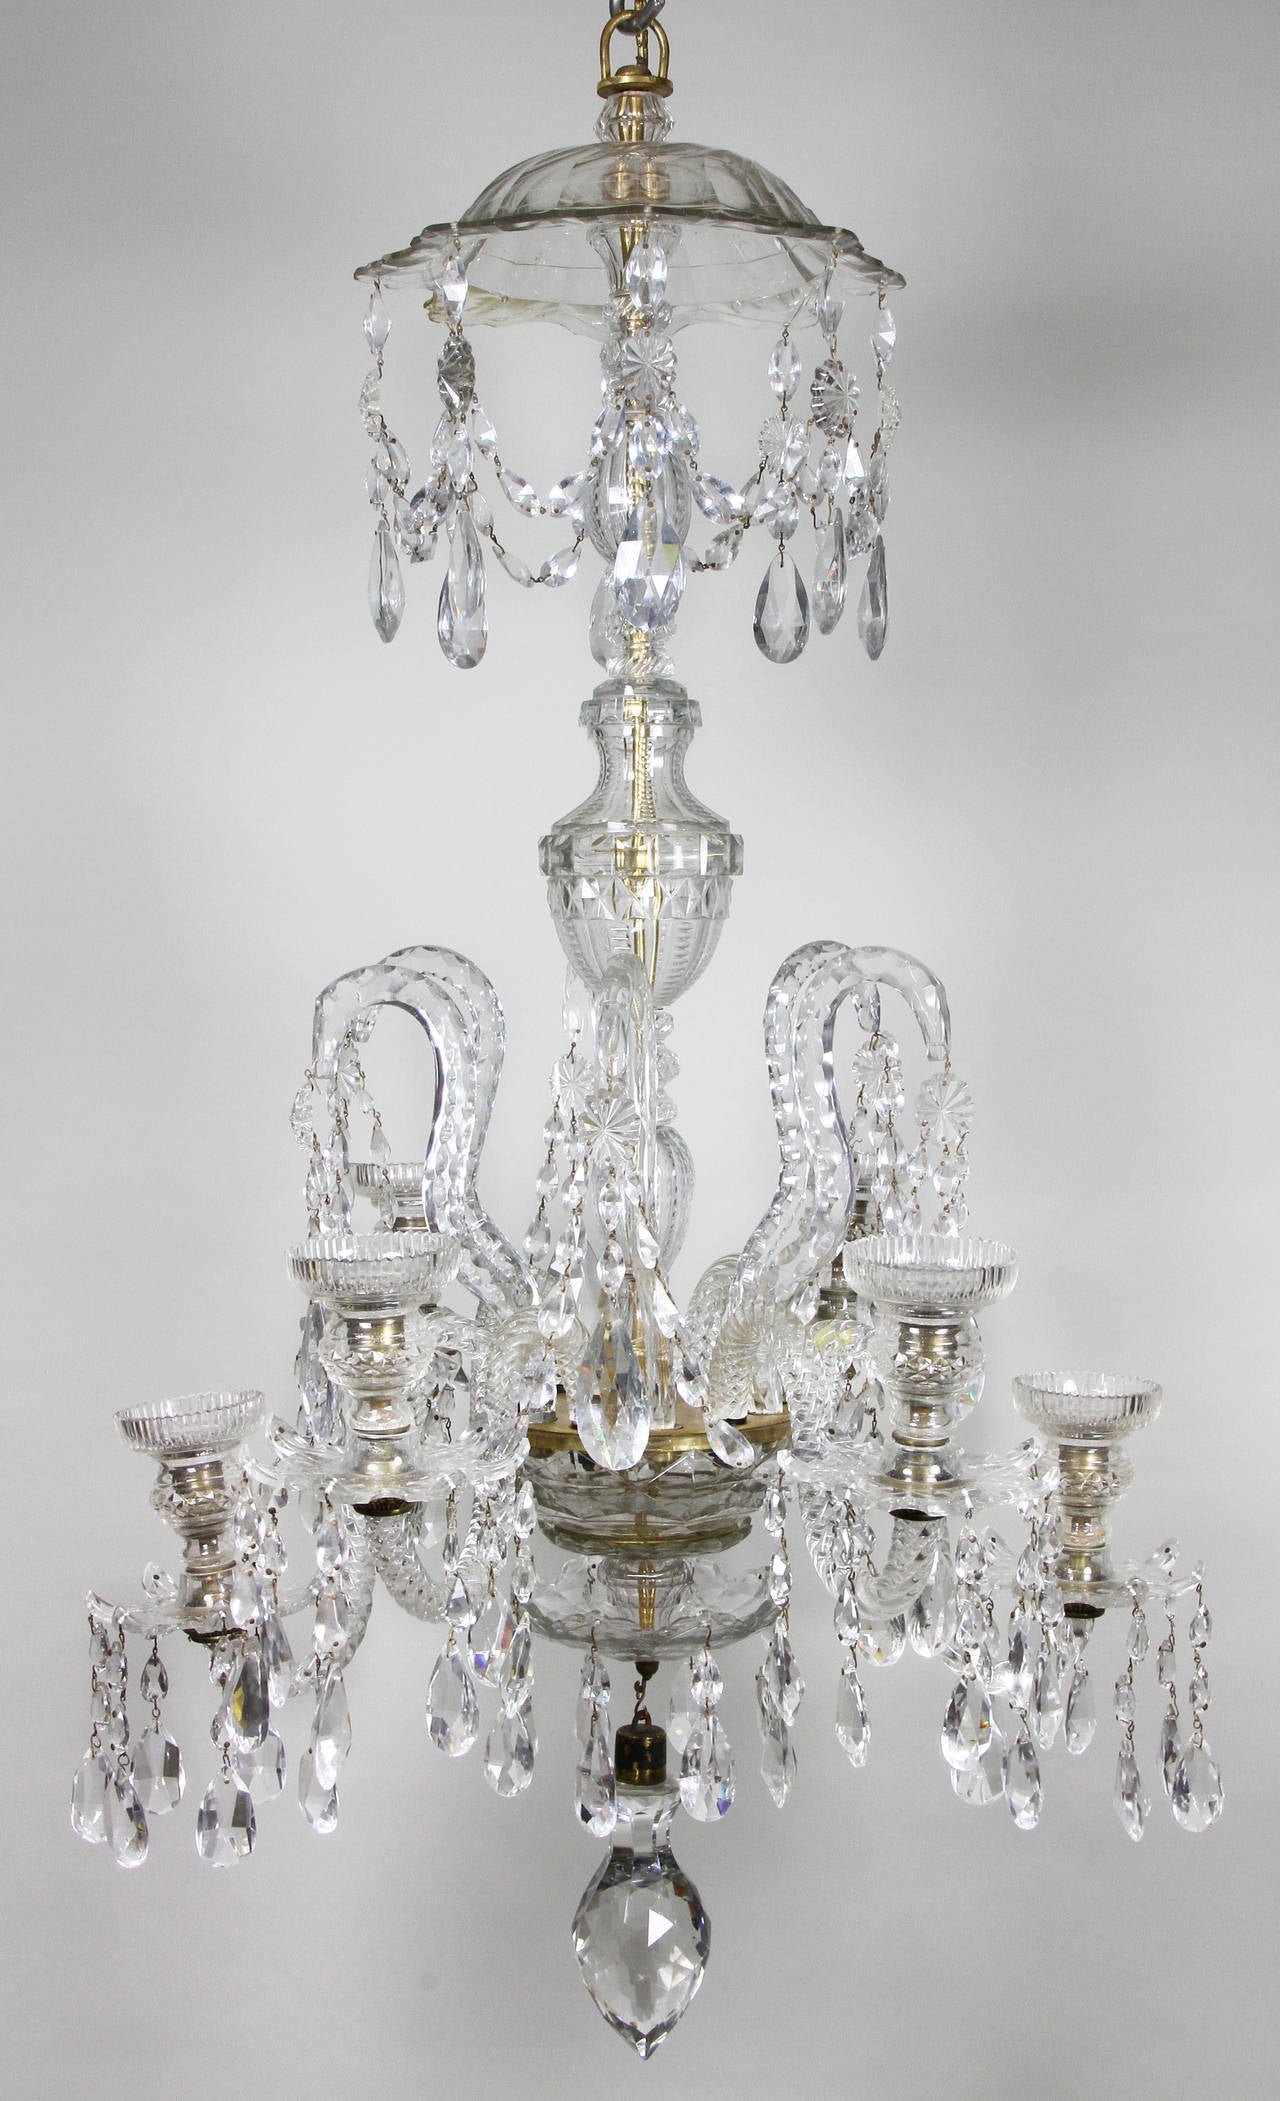 With canopy with suspended drops and cut urn form central support with six hooked arched arms with trailing drops over six candle arms two of probable later date, ending with a canopy and large faceted drop.